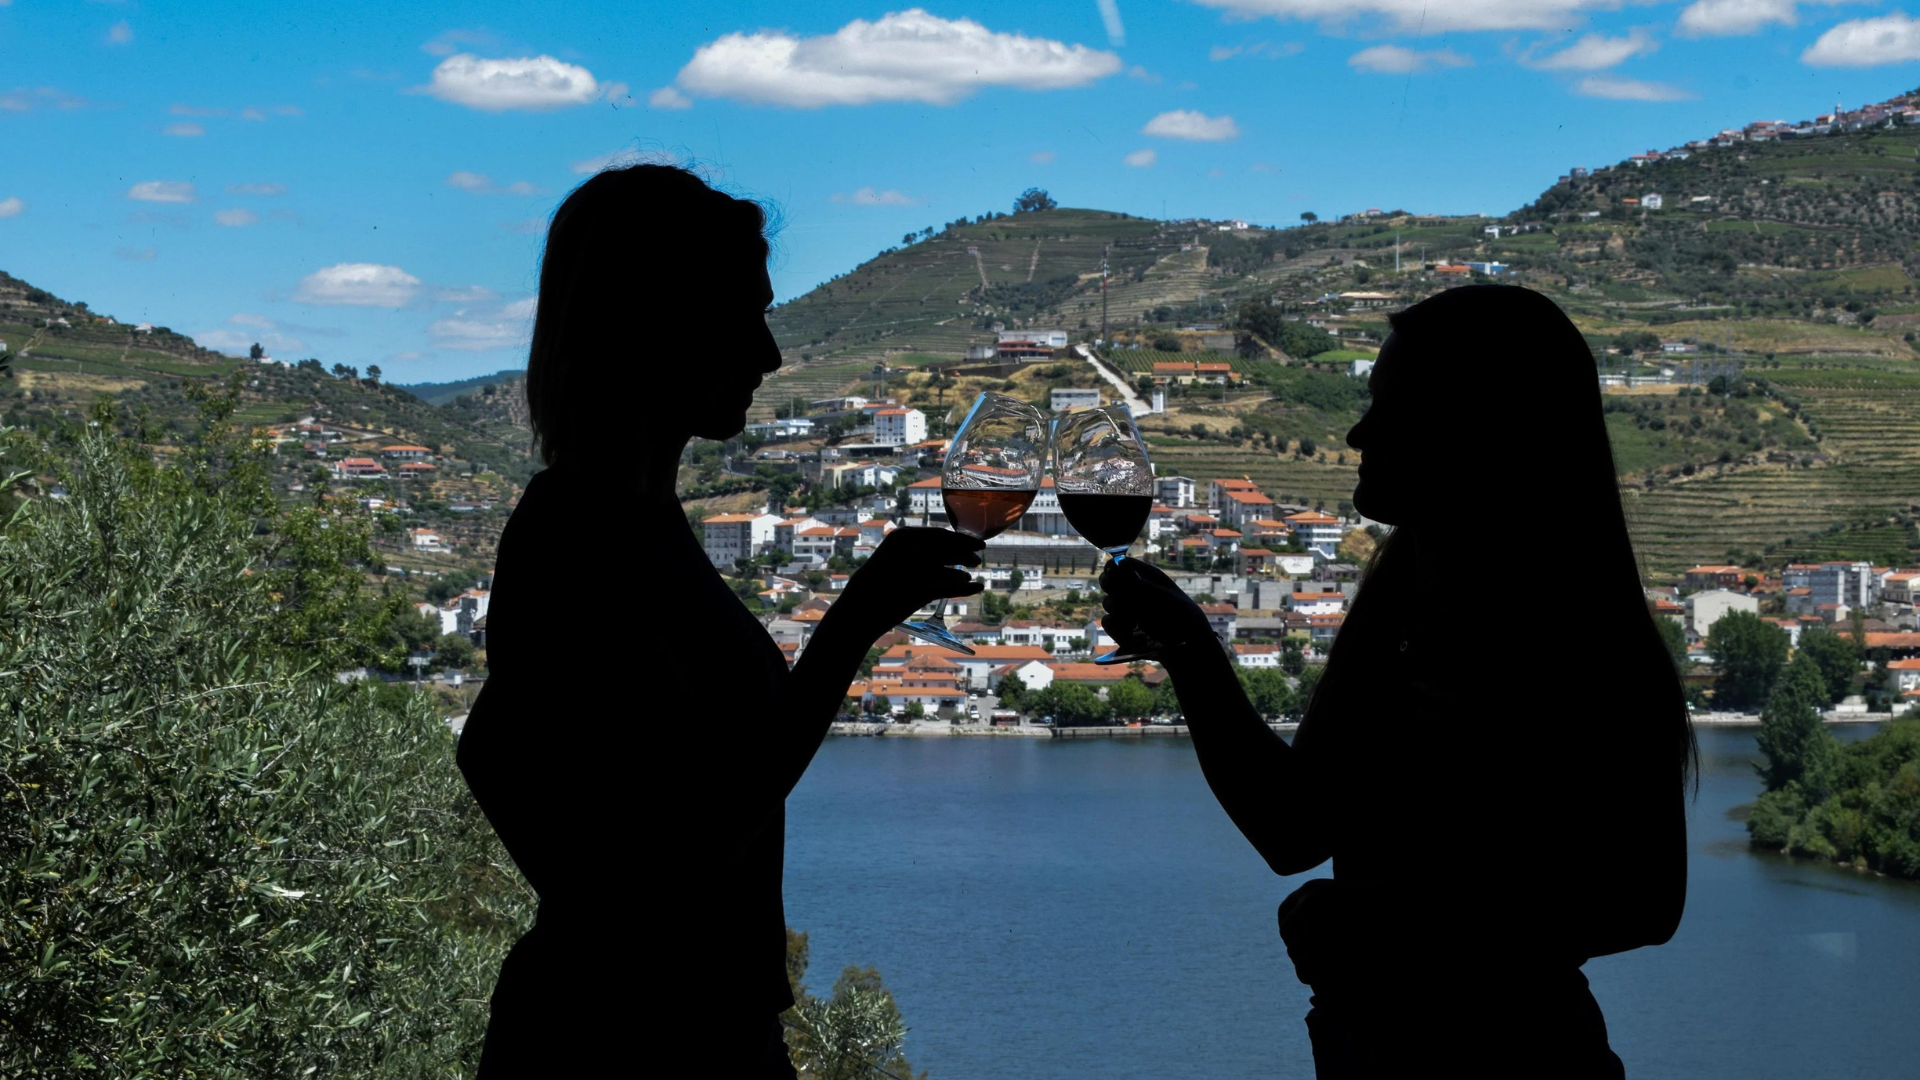 Discover the Best Hotels in Douro Valley Portugal